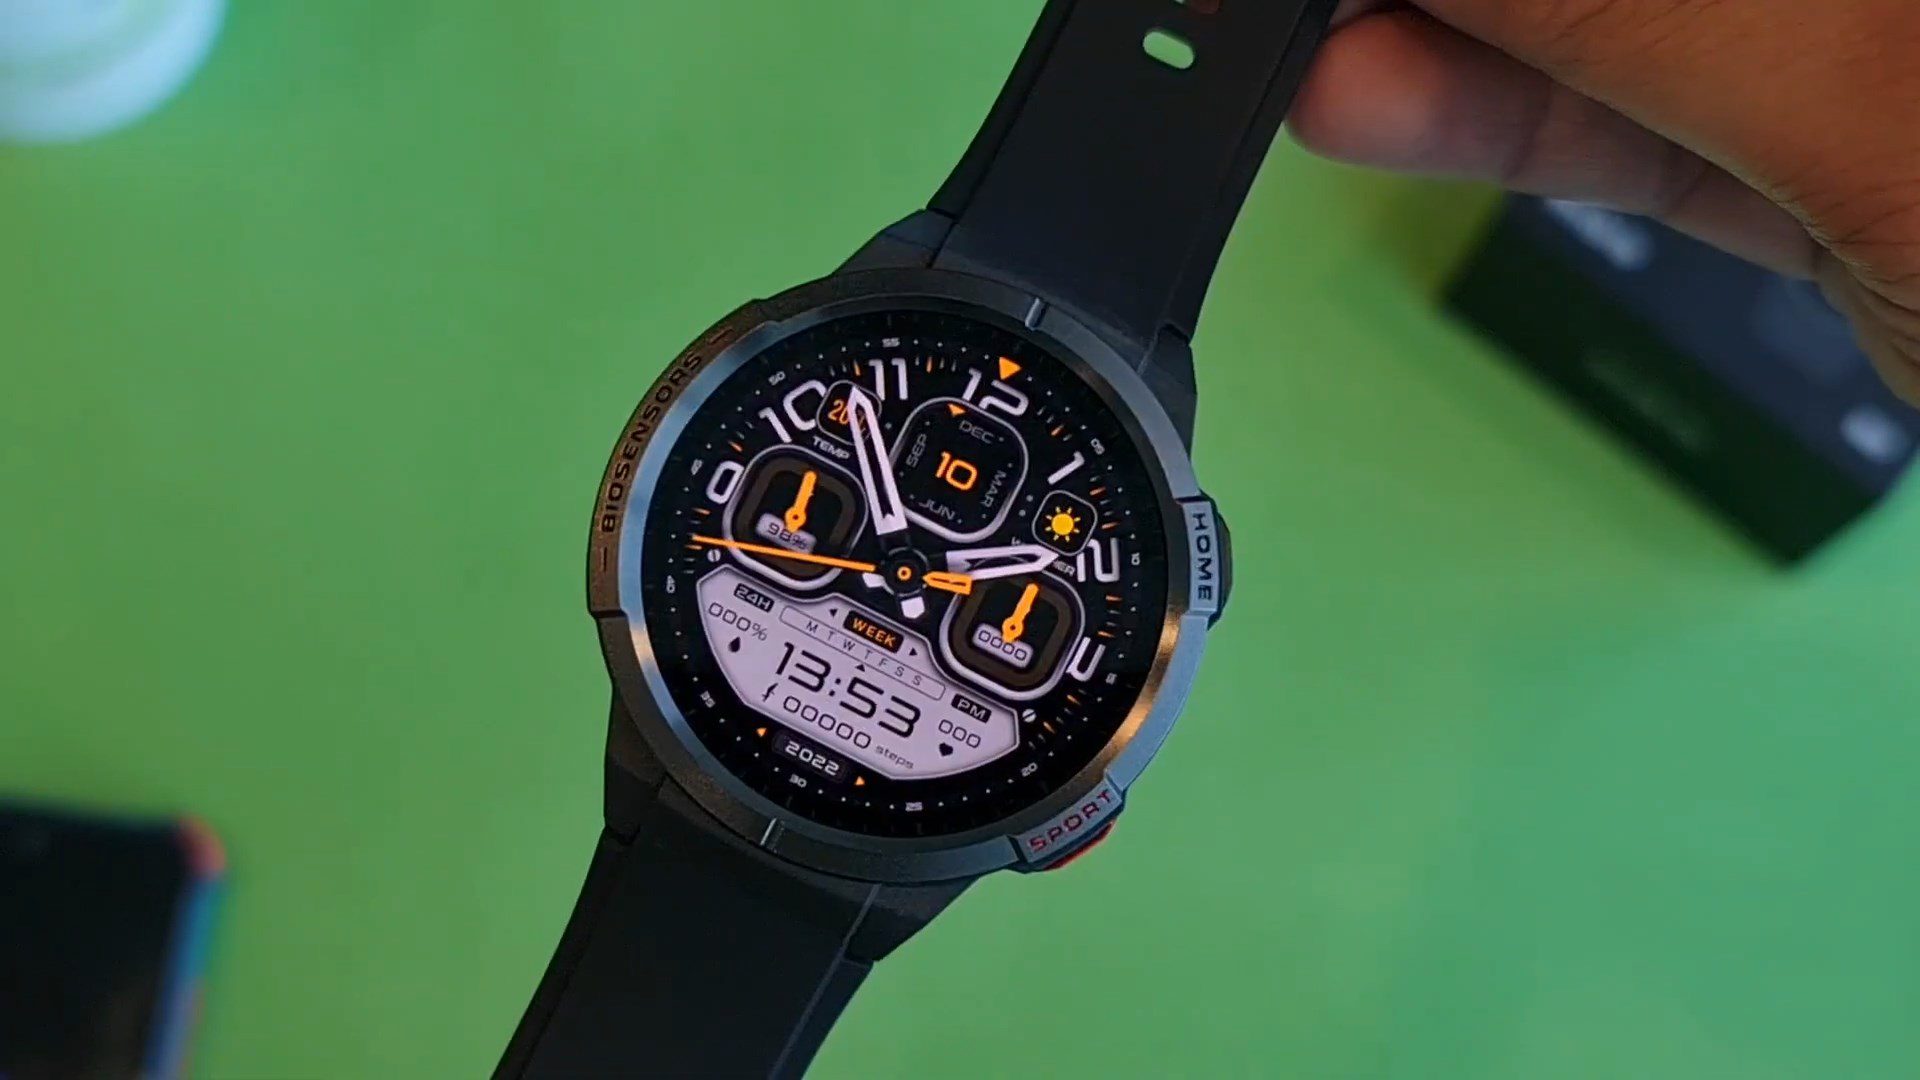 Mibro GS Review – New Smartwatch With AMOLED Display & GPS Chip